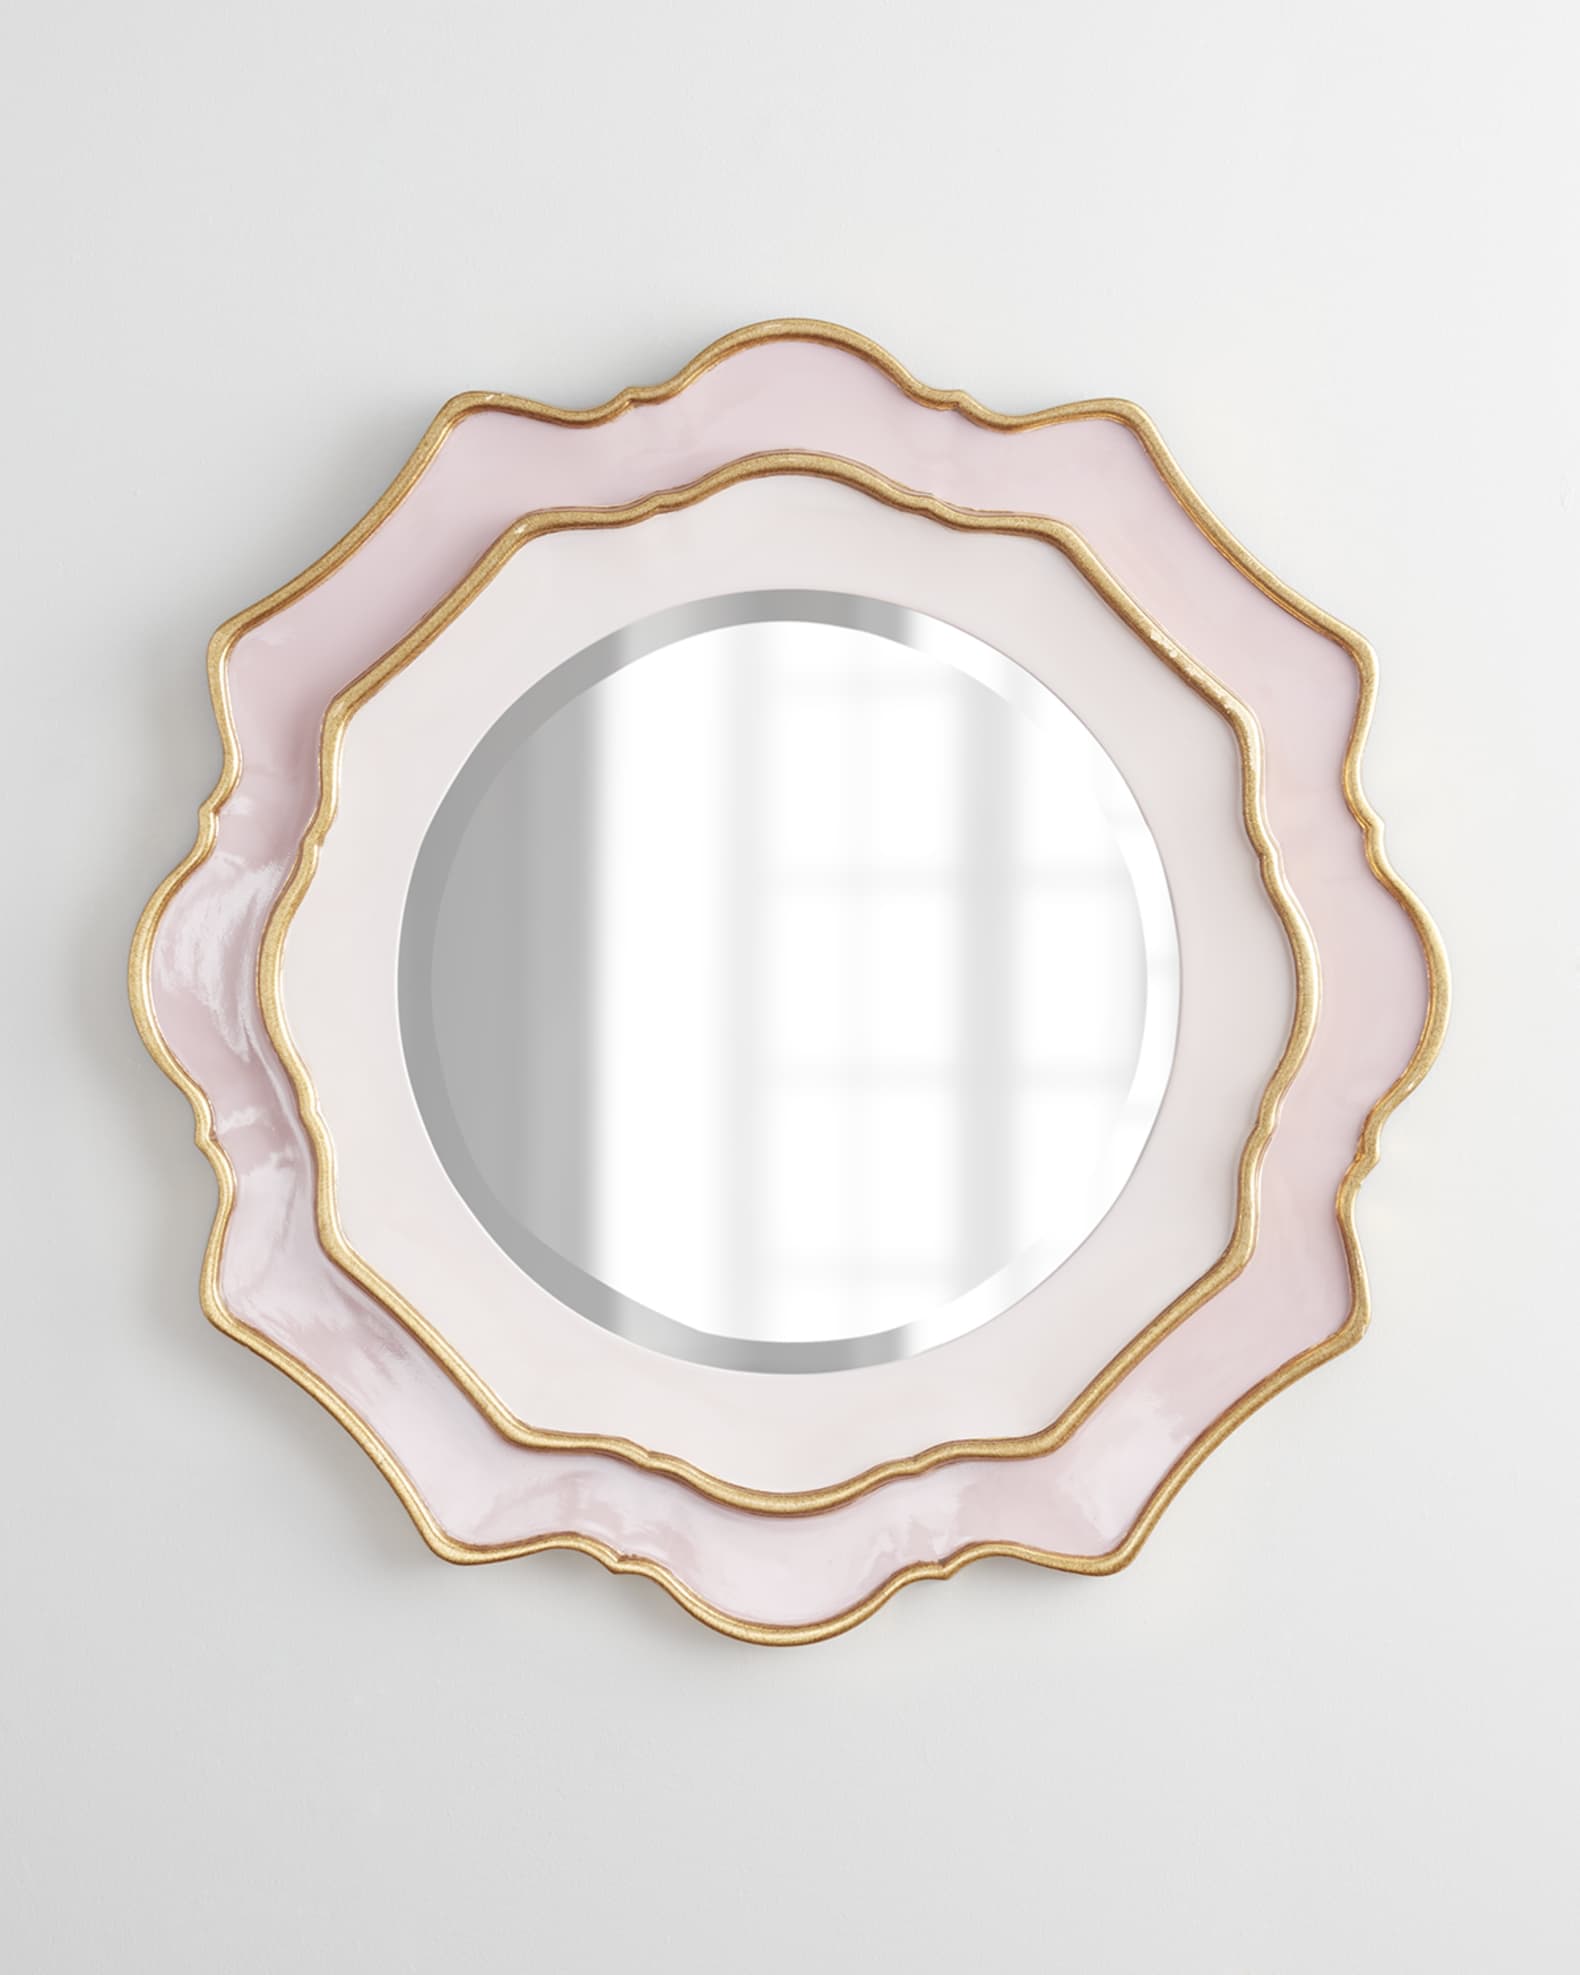 Two Tone Mirror | Horchow